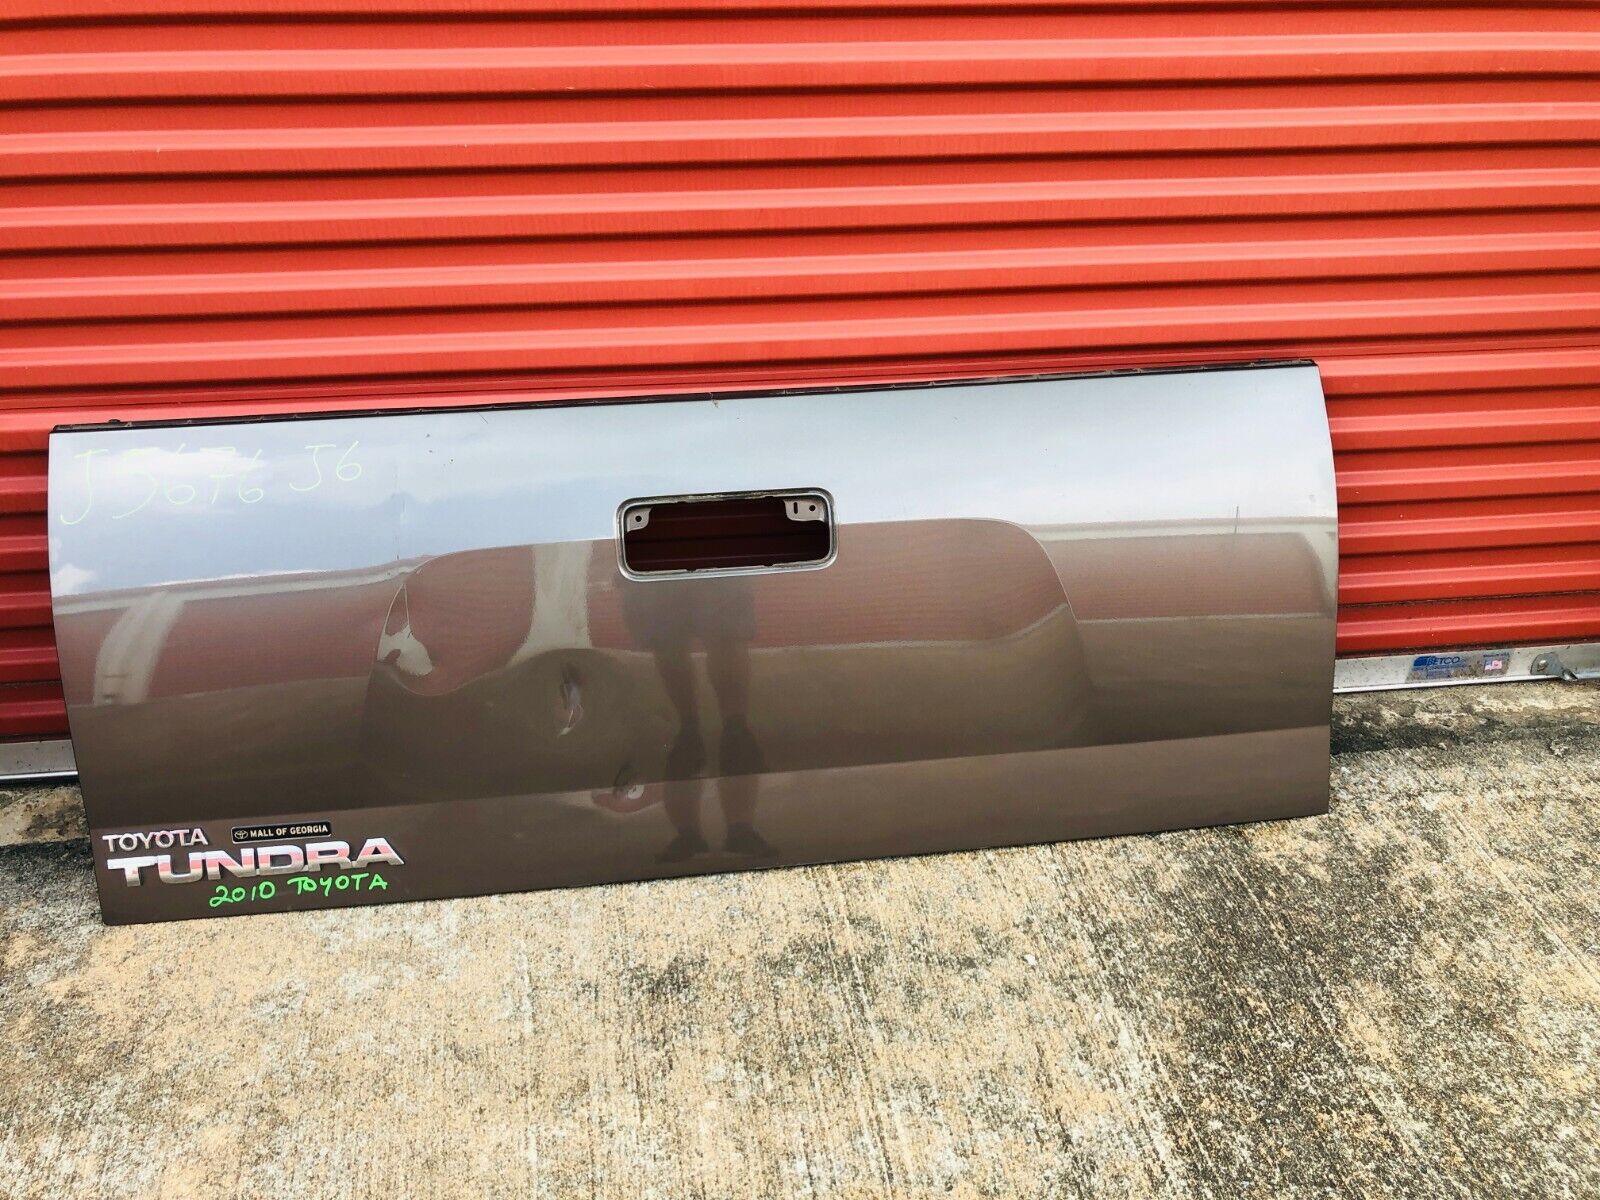 Used 2007-2013 Toyota Tundra Rear Oem Tailgate Tail Gate for Sale